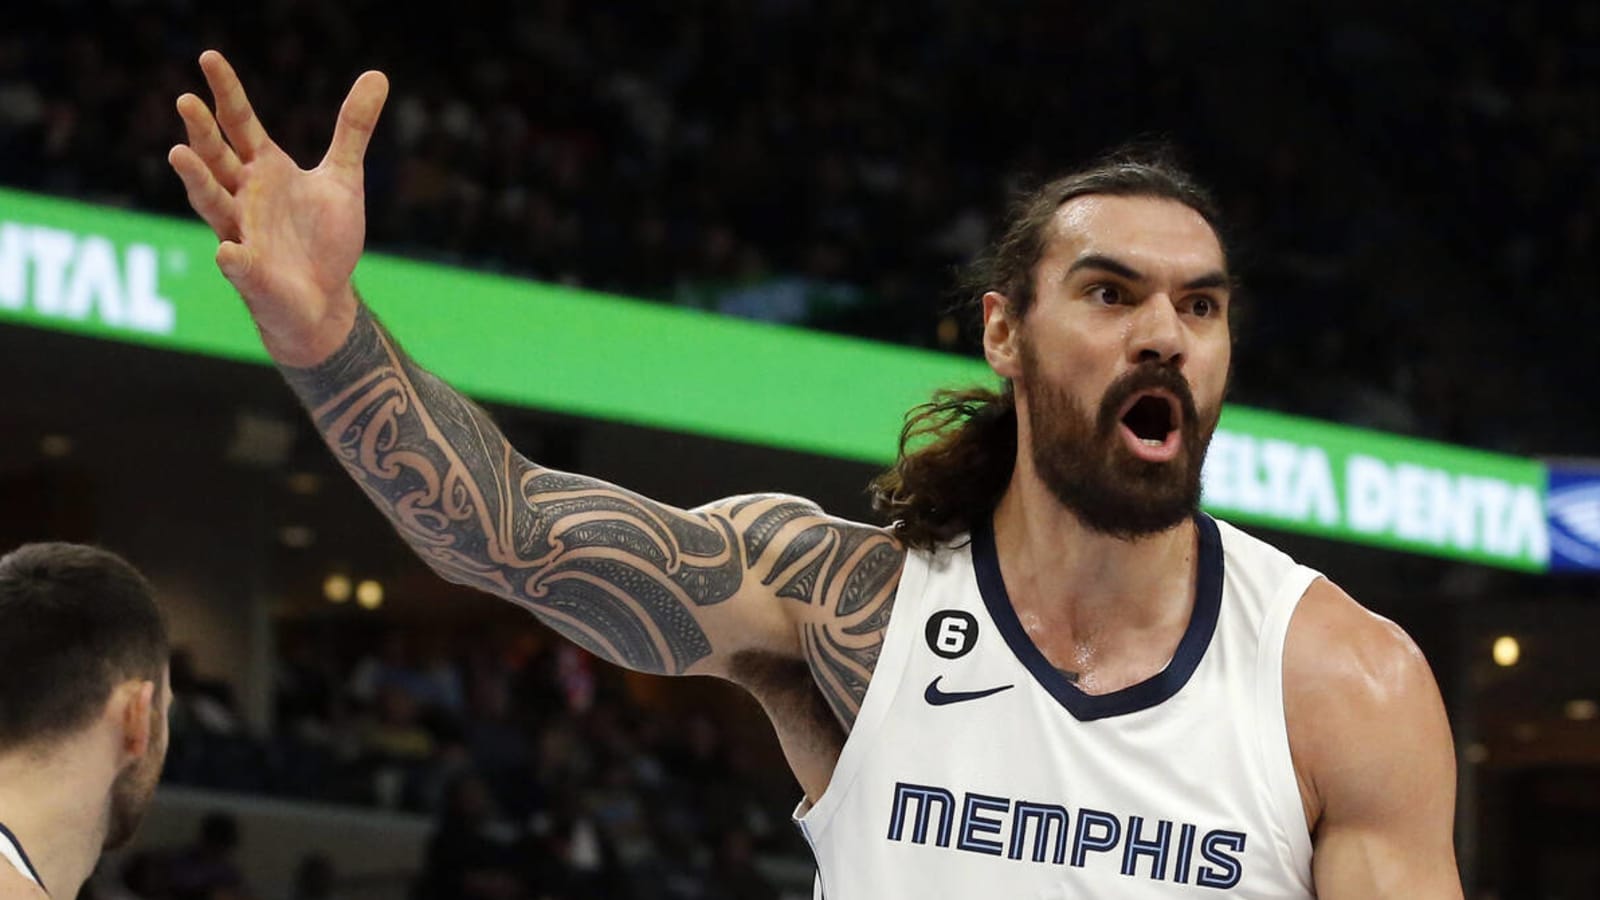 Grizzlies center to miss entire season after knee surgery